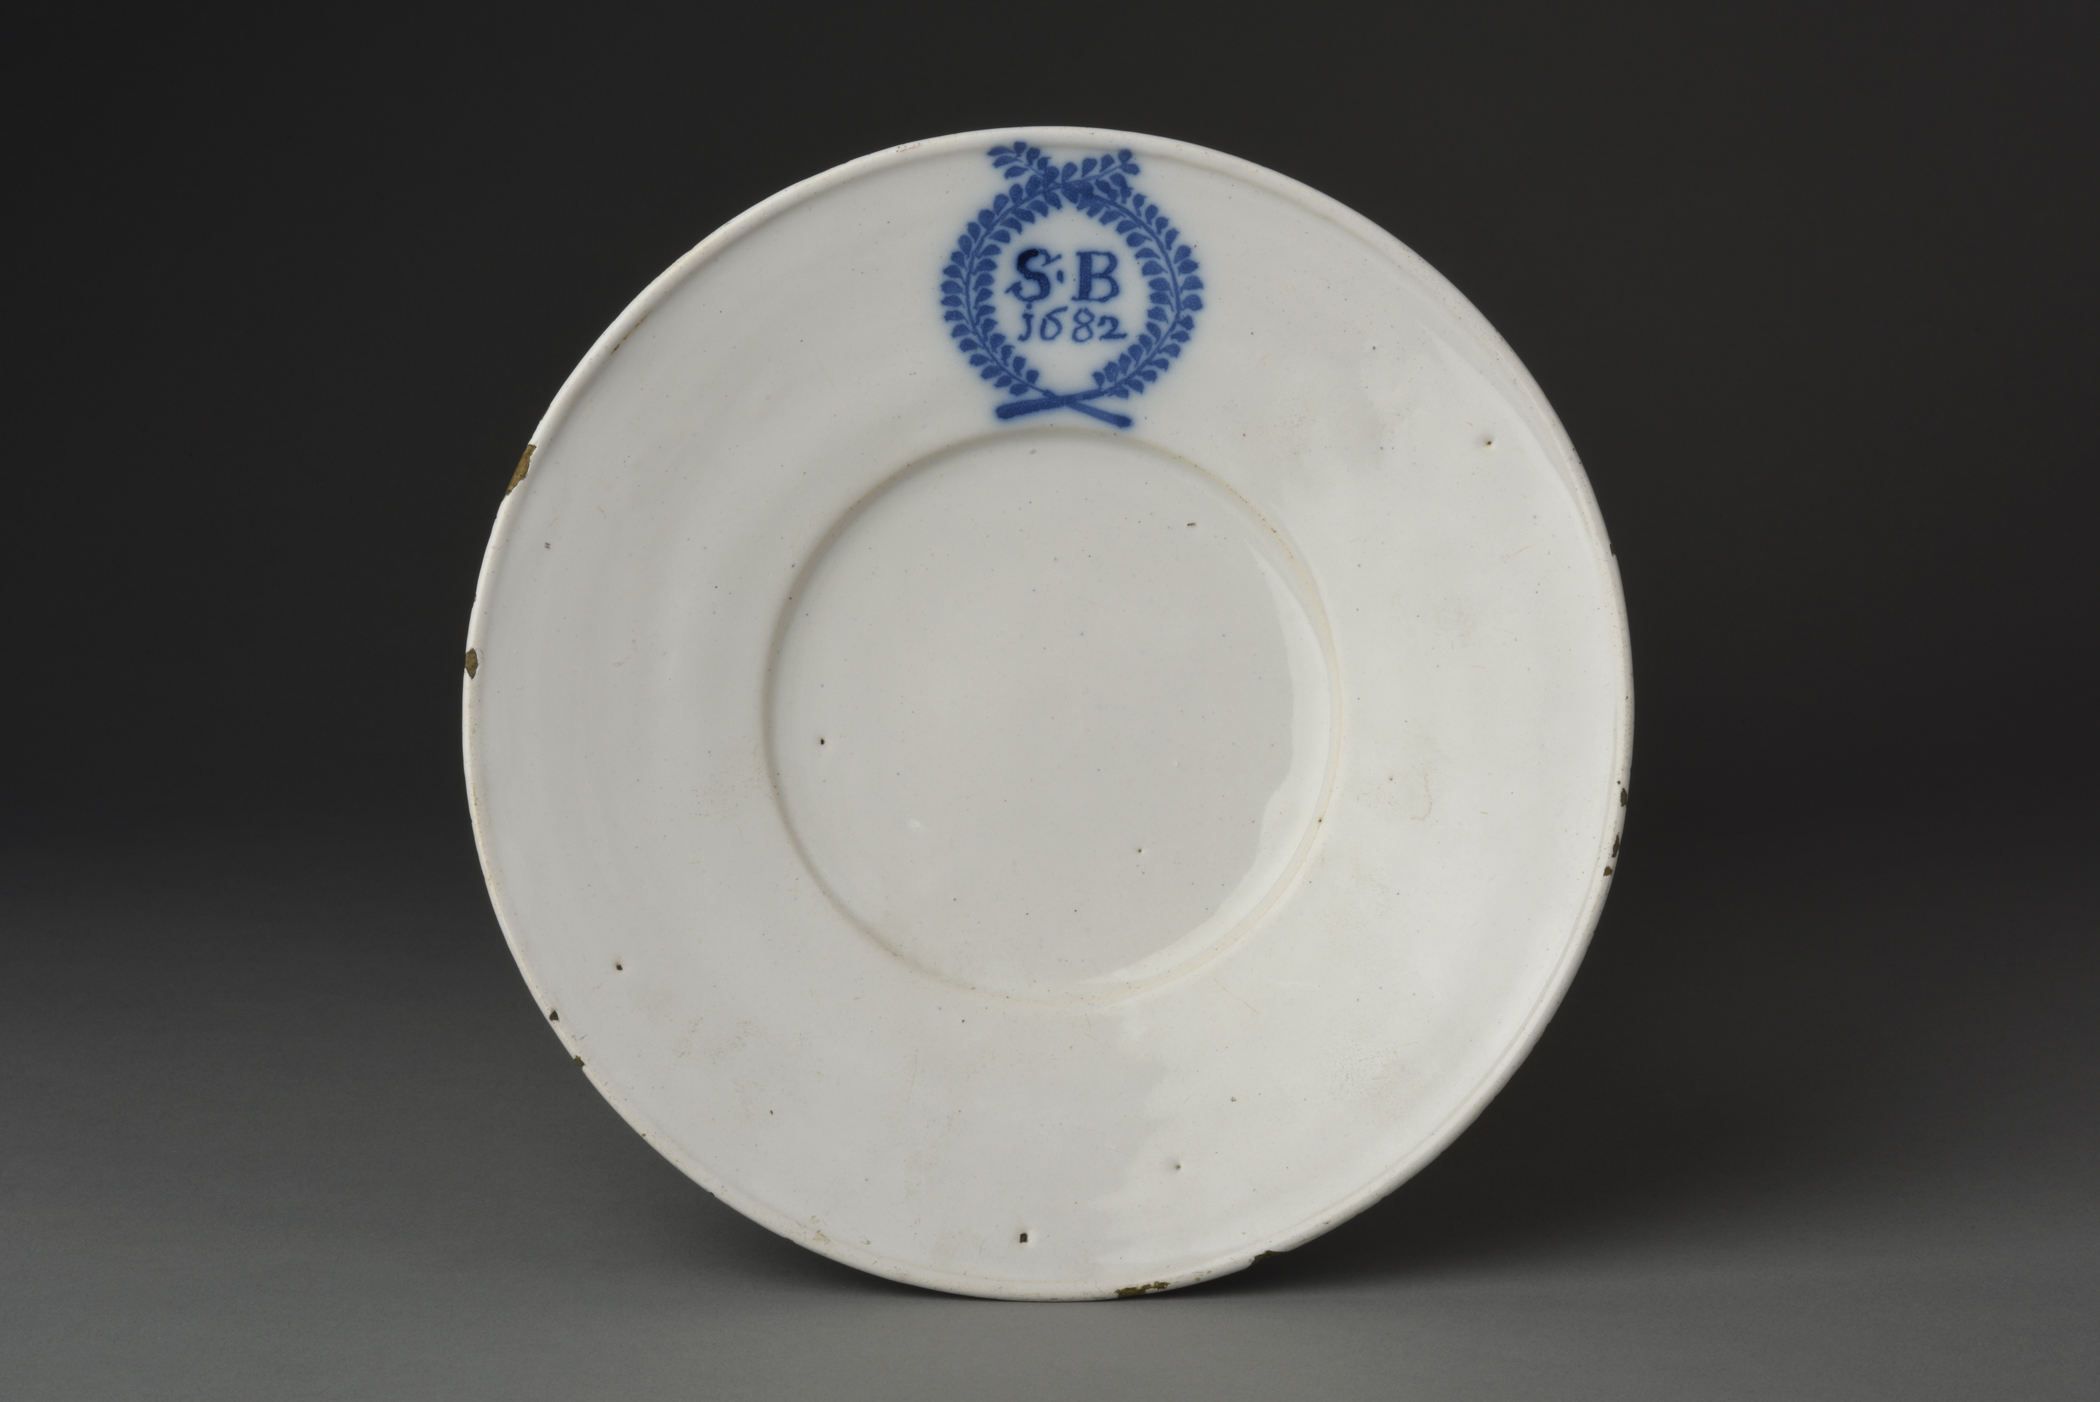 2016.0034.017 Plate, view 1